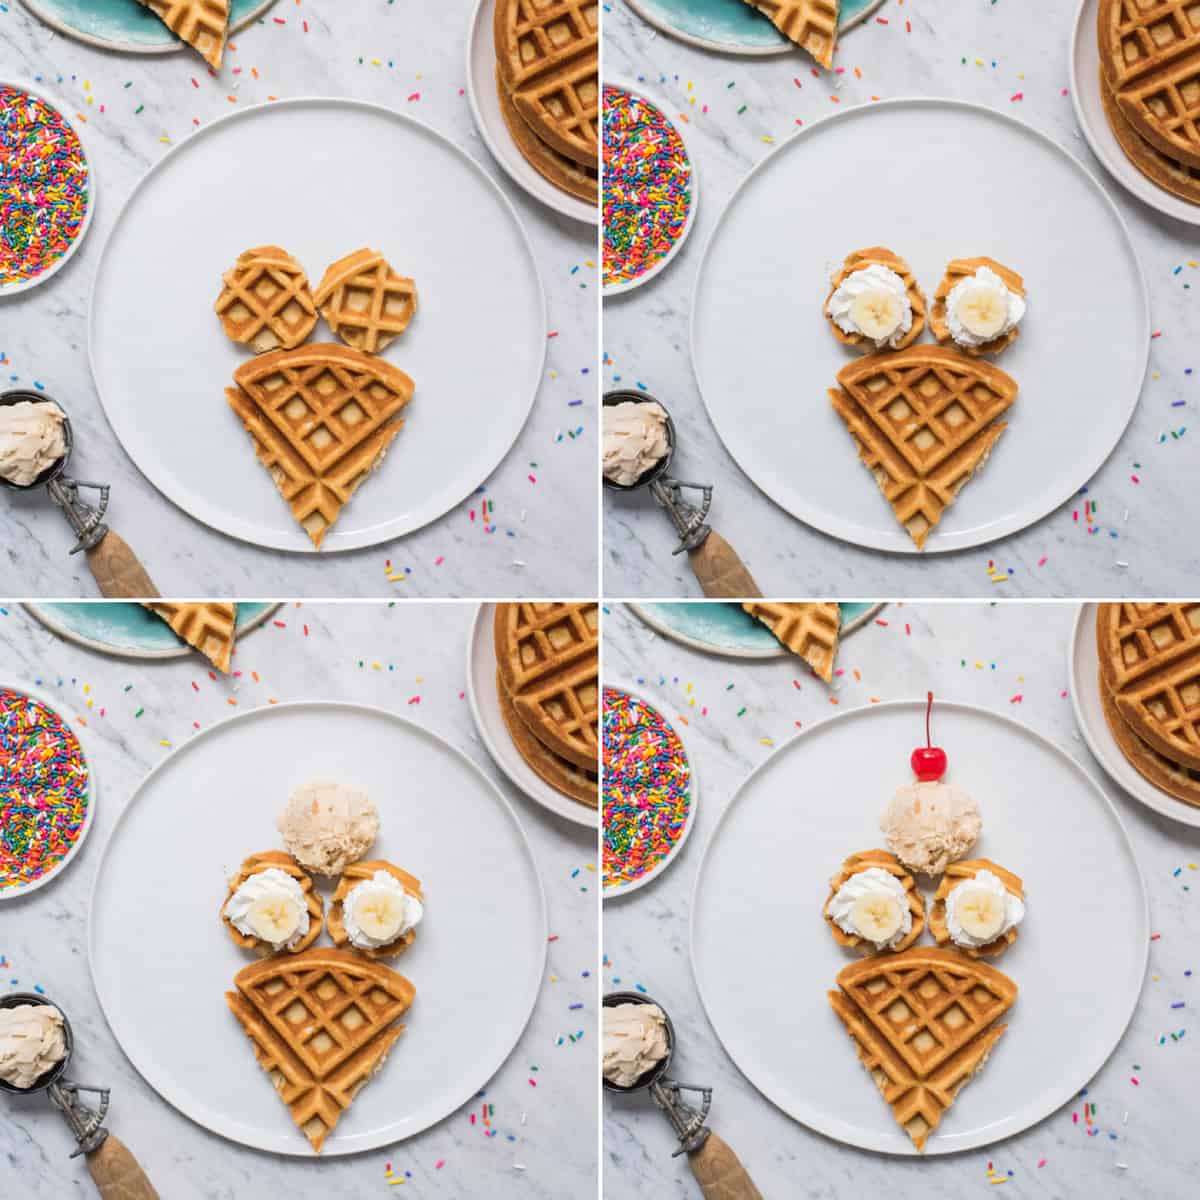 waffles cut and arranged in the shape of an ice cream cone on white plate on white background